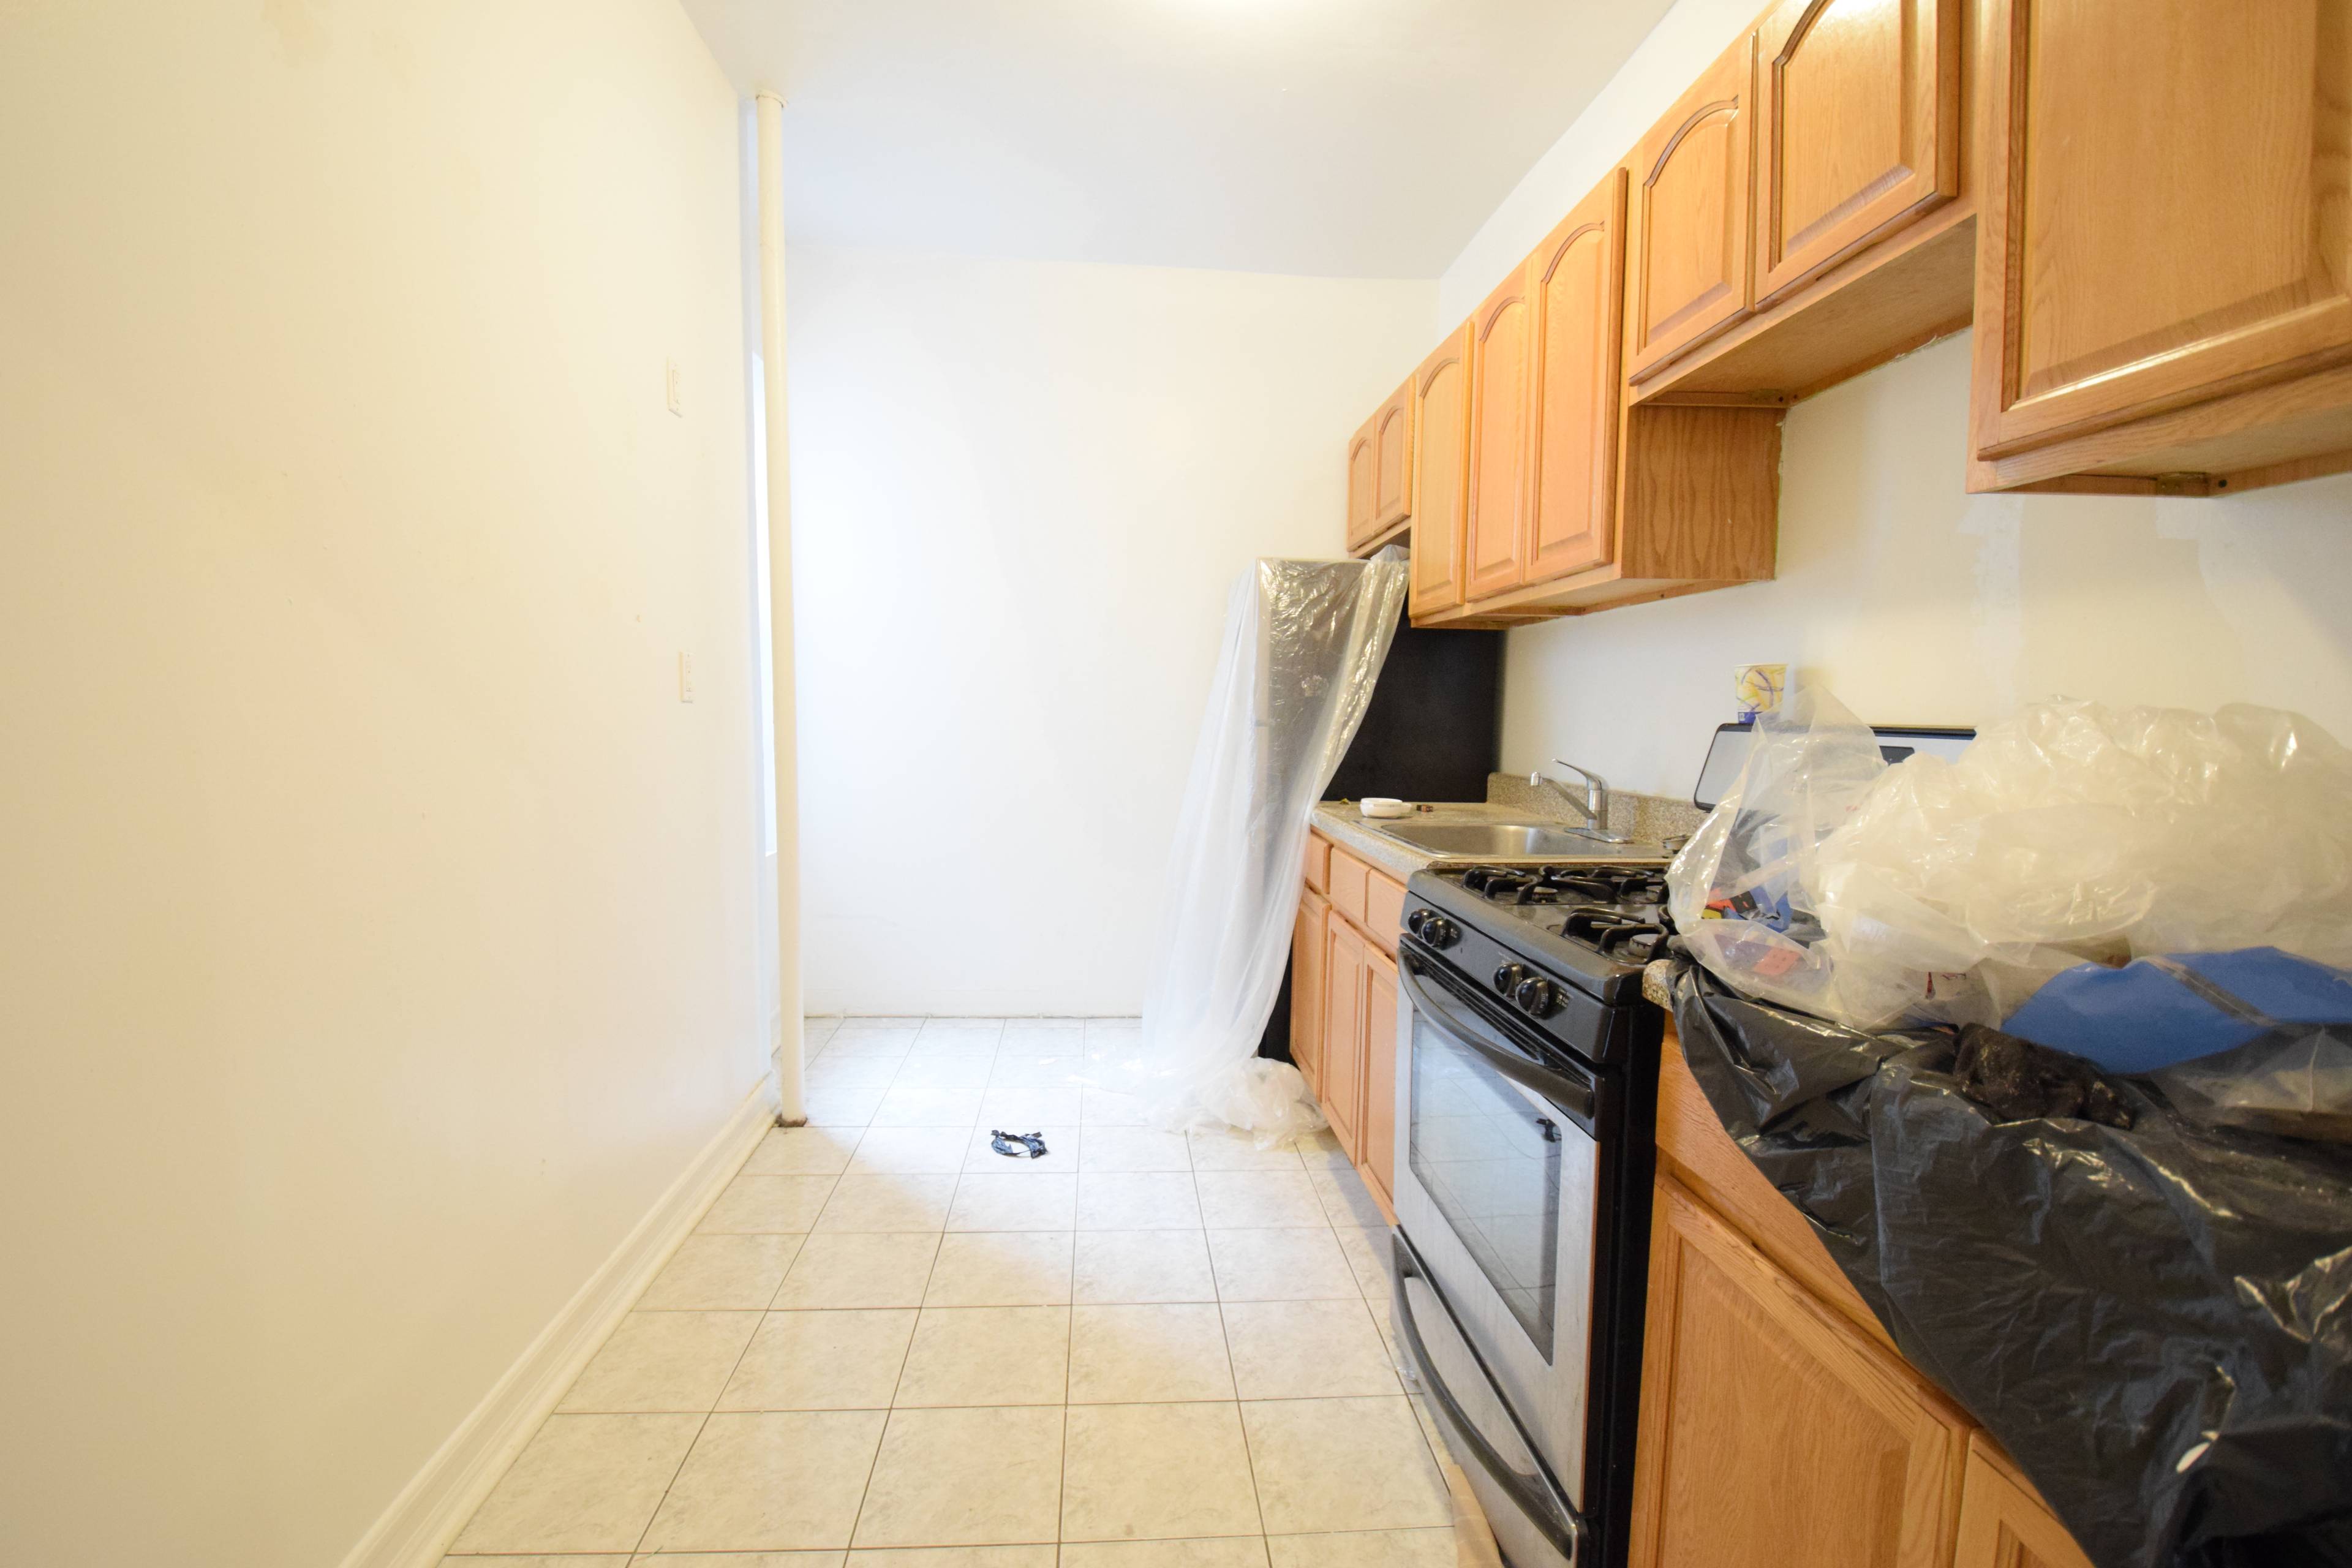 Crown Heights 1 bedroom. Up 2 flights of stairs you enter into this large 2 bedroom in the process of being freshly painted.